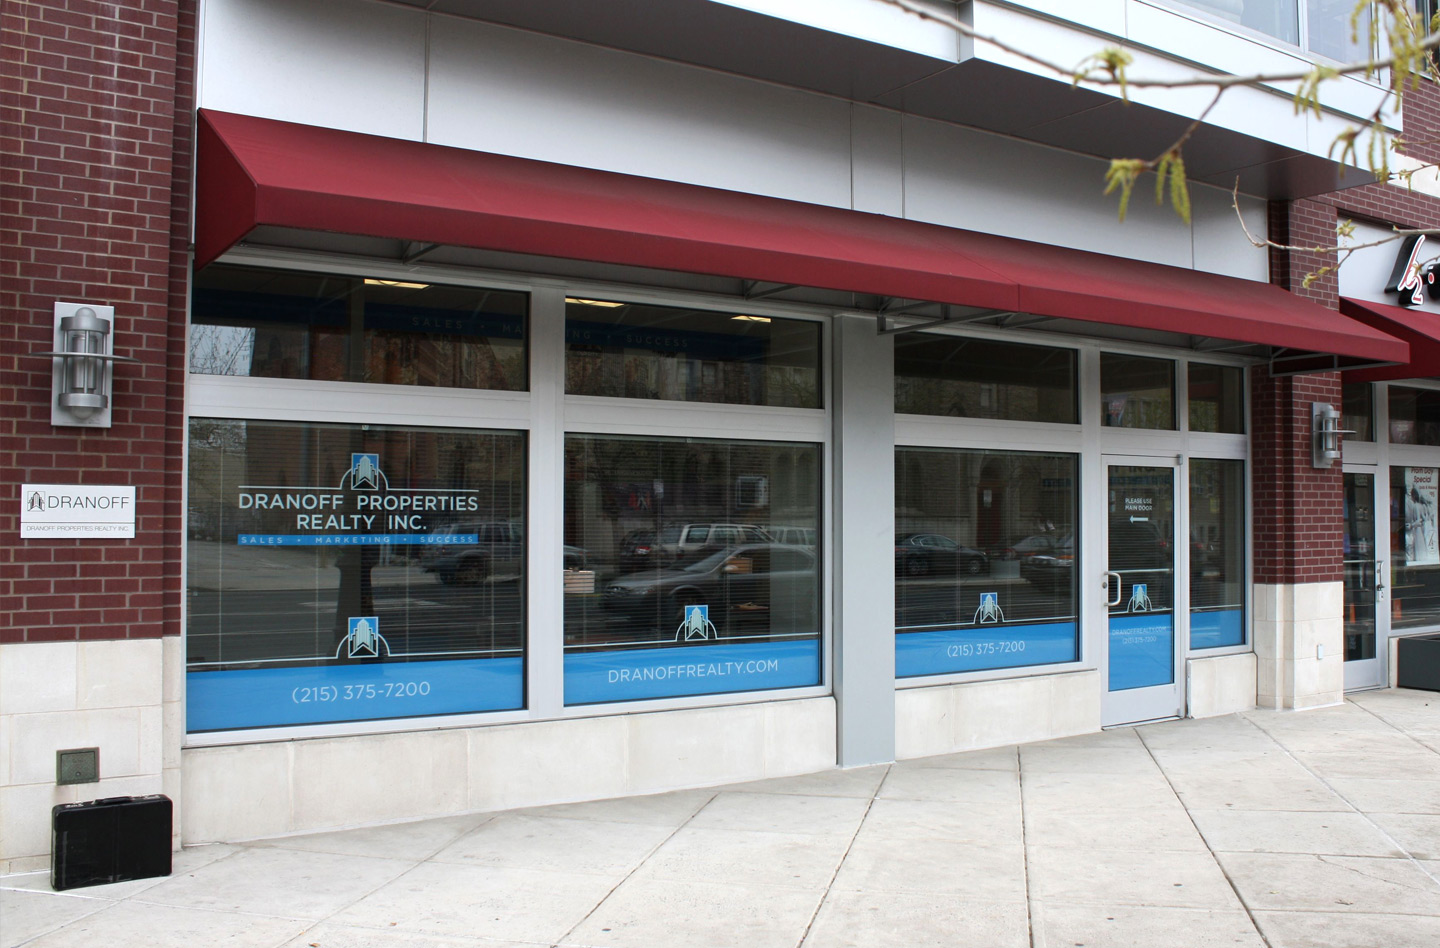 Dranoff Realty window graphics by advertising agency in Philadelphia